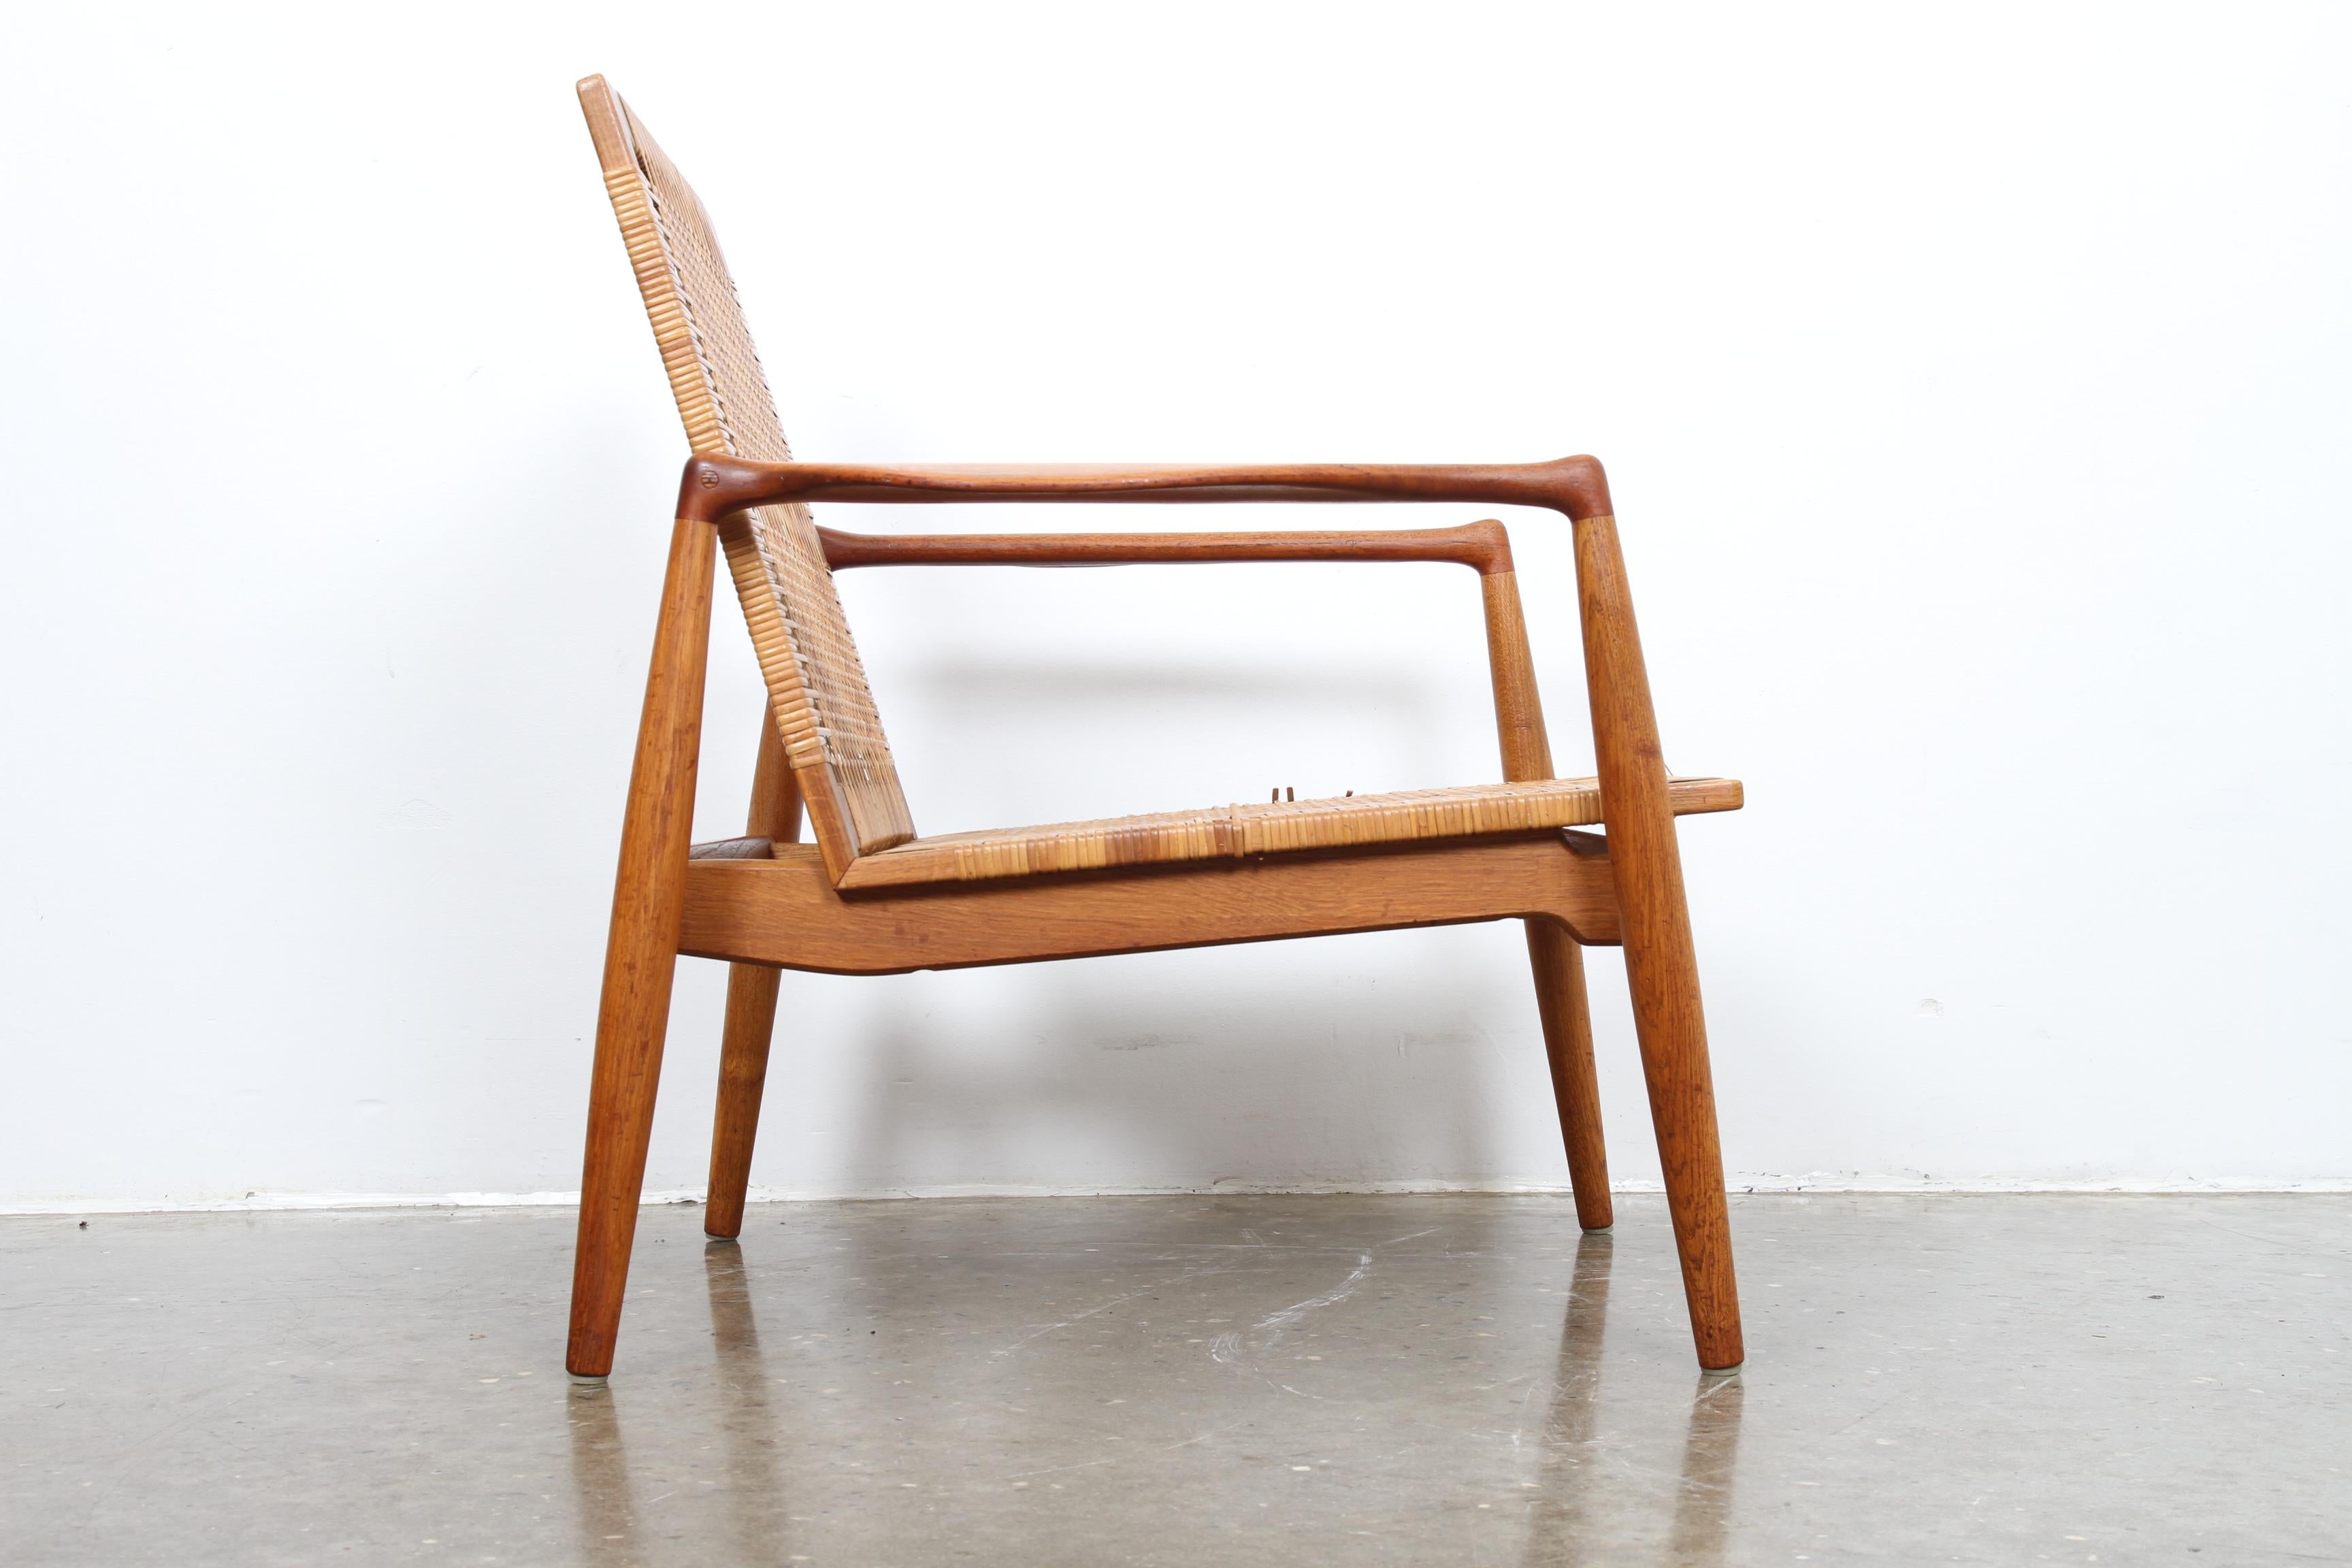 This very rare lounge chair is designed by danish architect Finn Juhl in 1956 is made in very limited numbers by Søren Willadsens Møbelfabrik. Finn Juhl is probably the most desired Danish architect, and that says a lot.
This chair is a sculpture